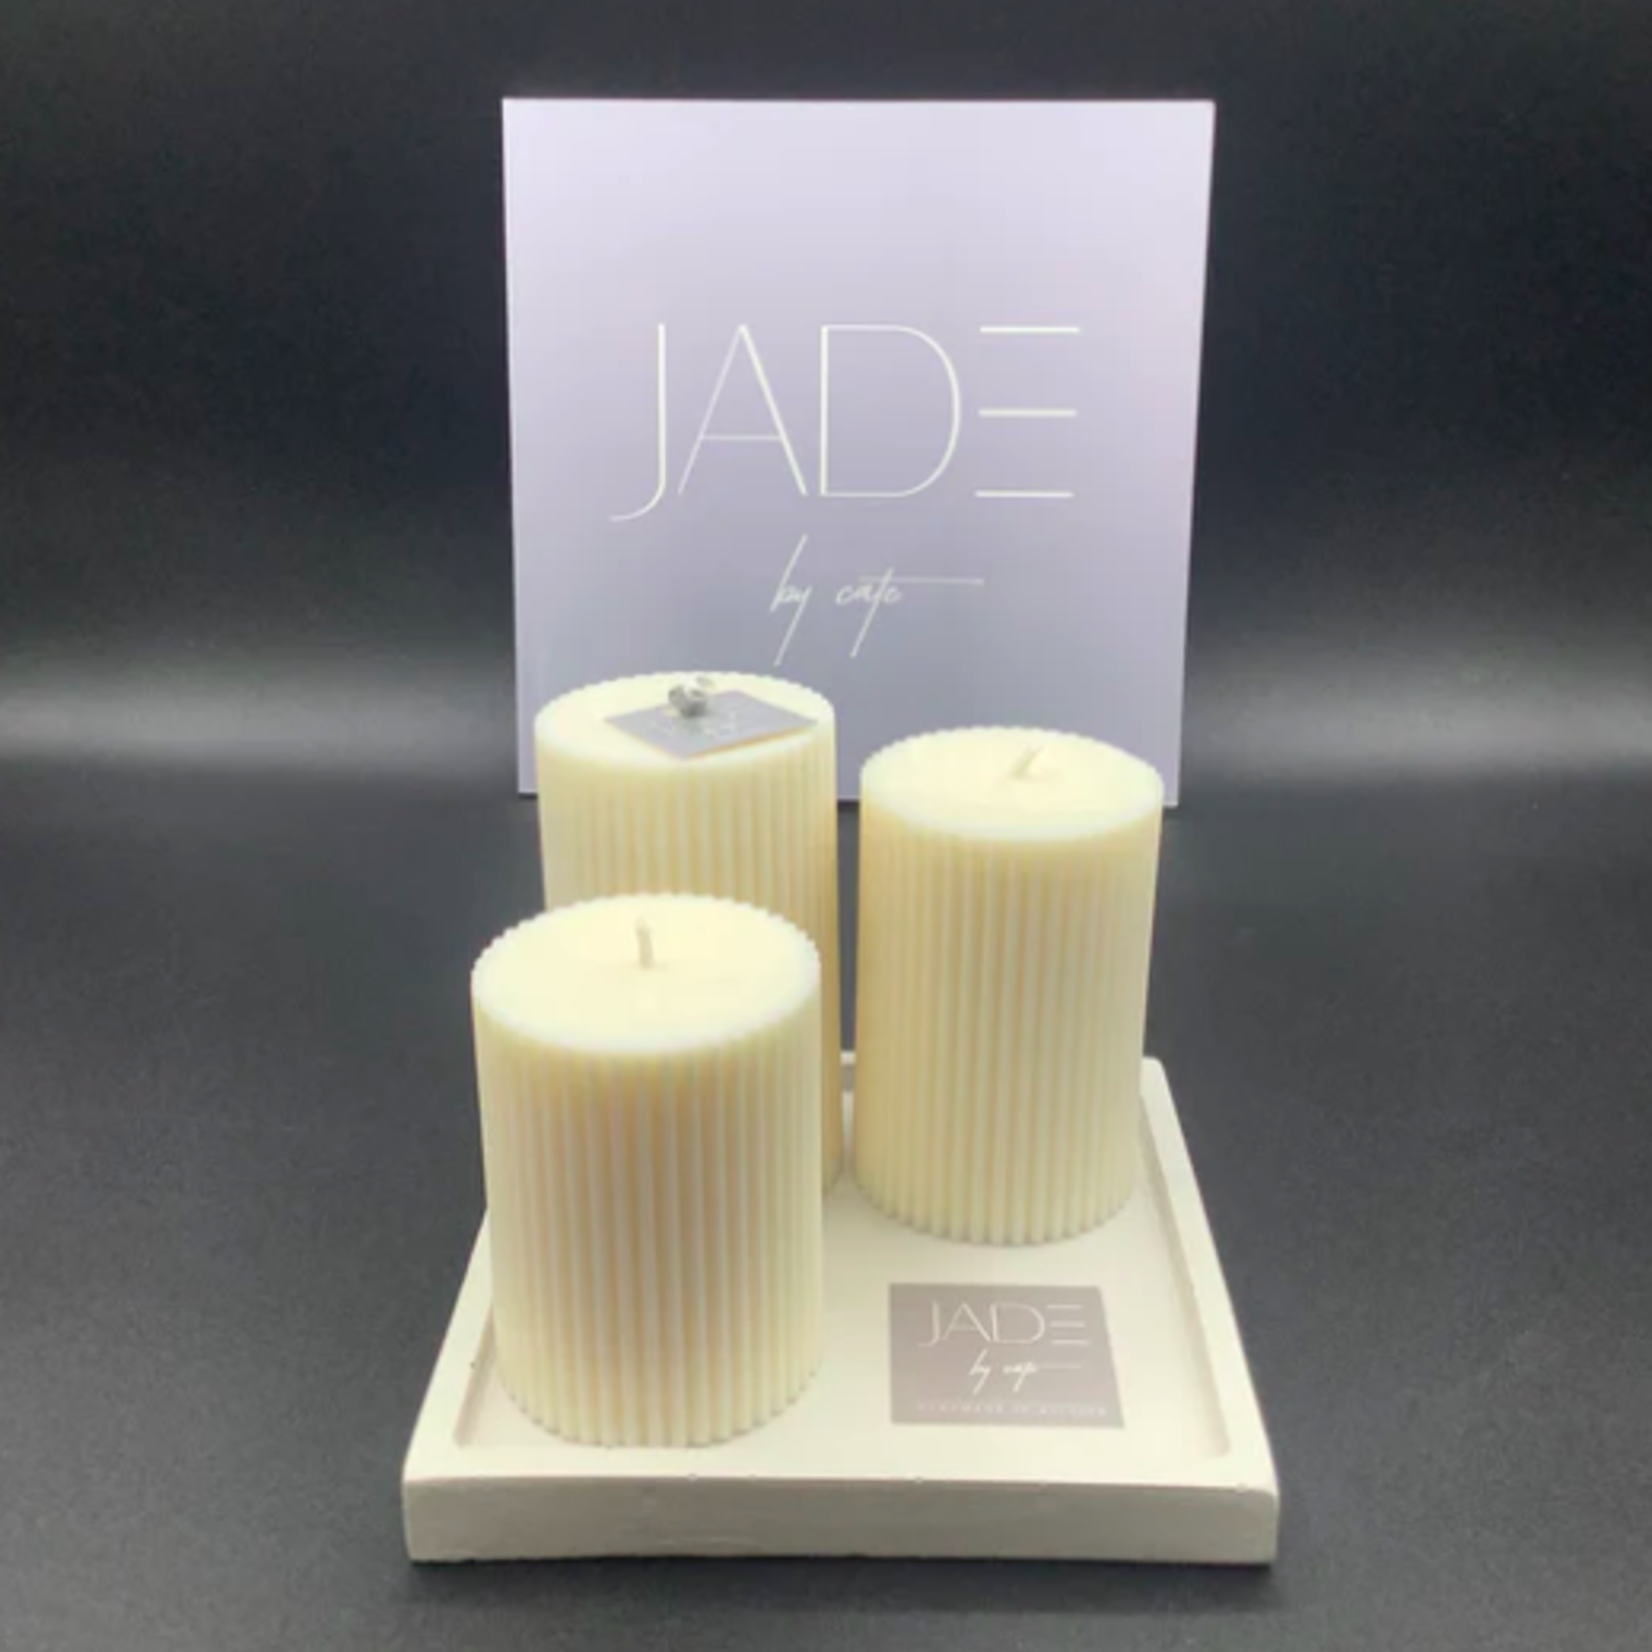 JADE BY CATE JADE BY CATE - 3 colonnes s/ support carré(PCP3)